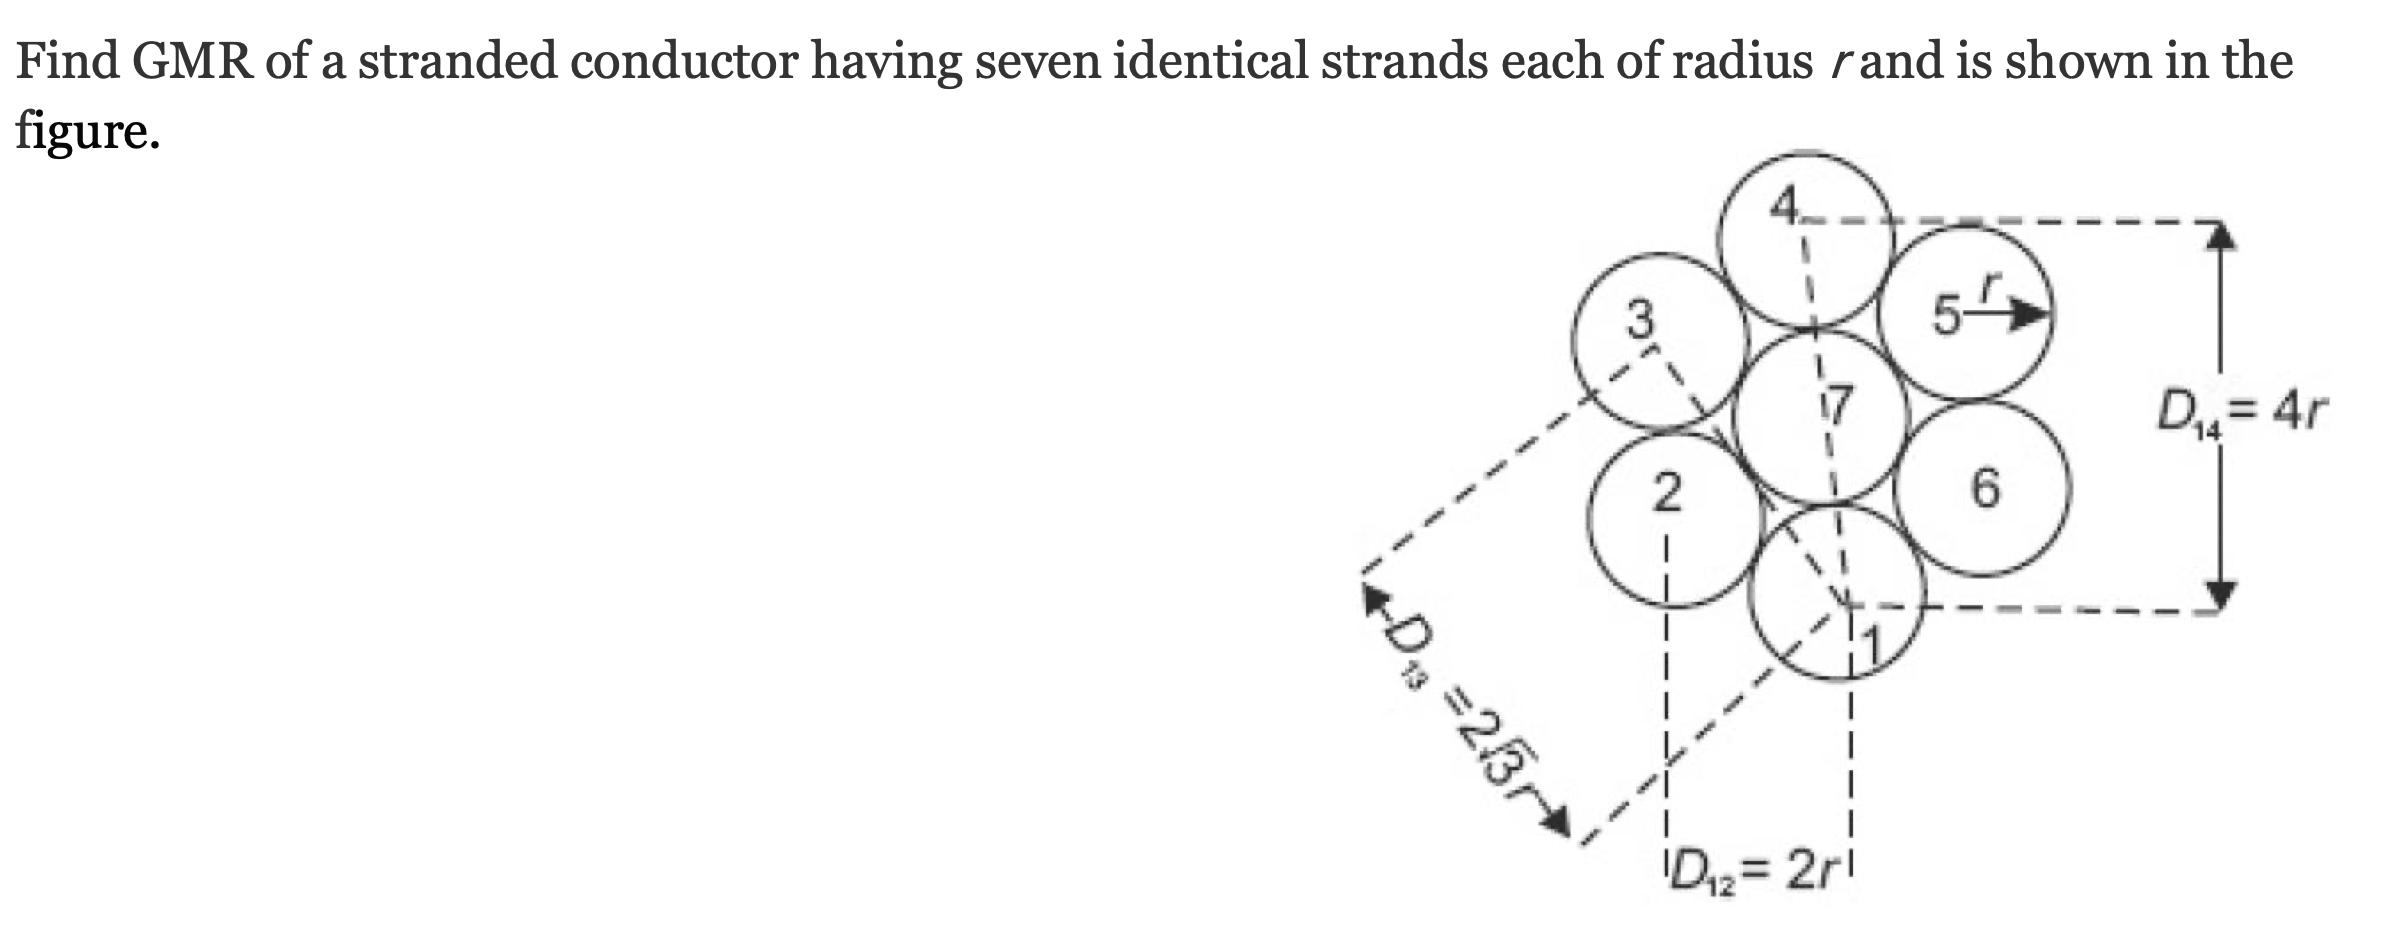 Find GMR of a stranded conductor having seven identical strands each of radius rand is shown in the figure.